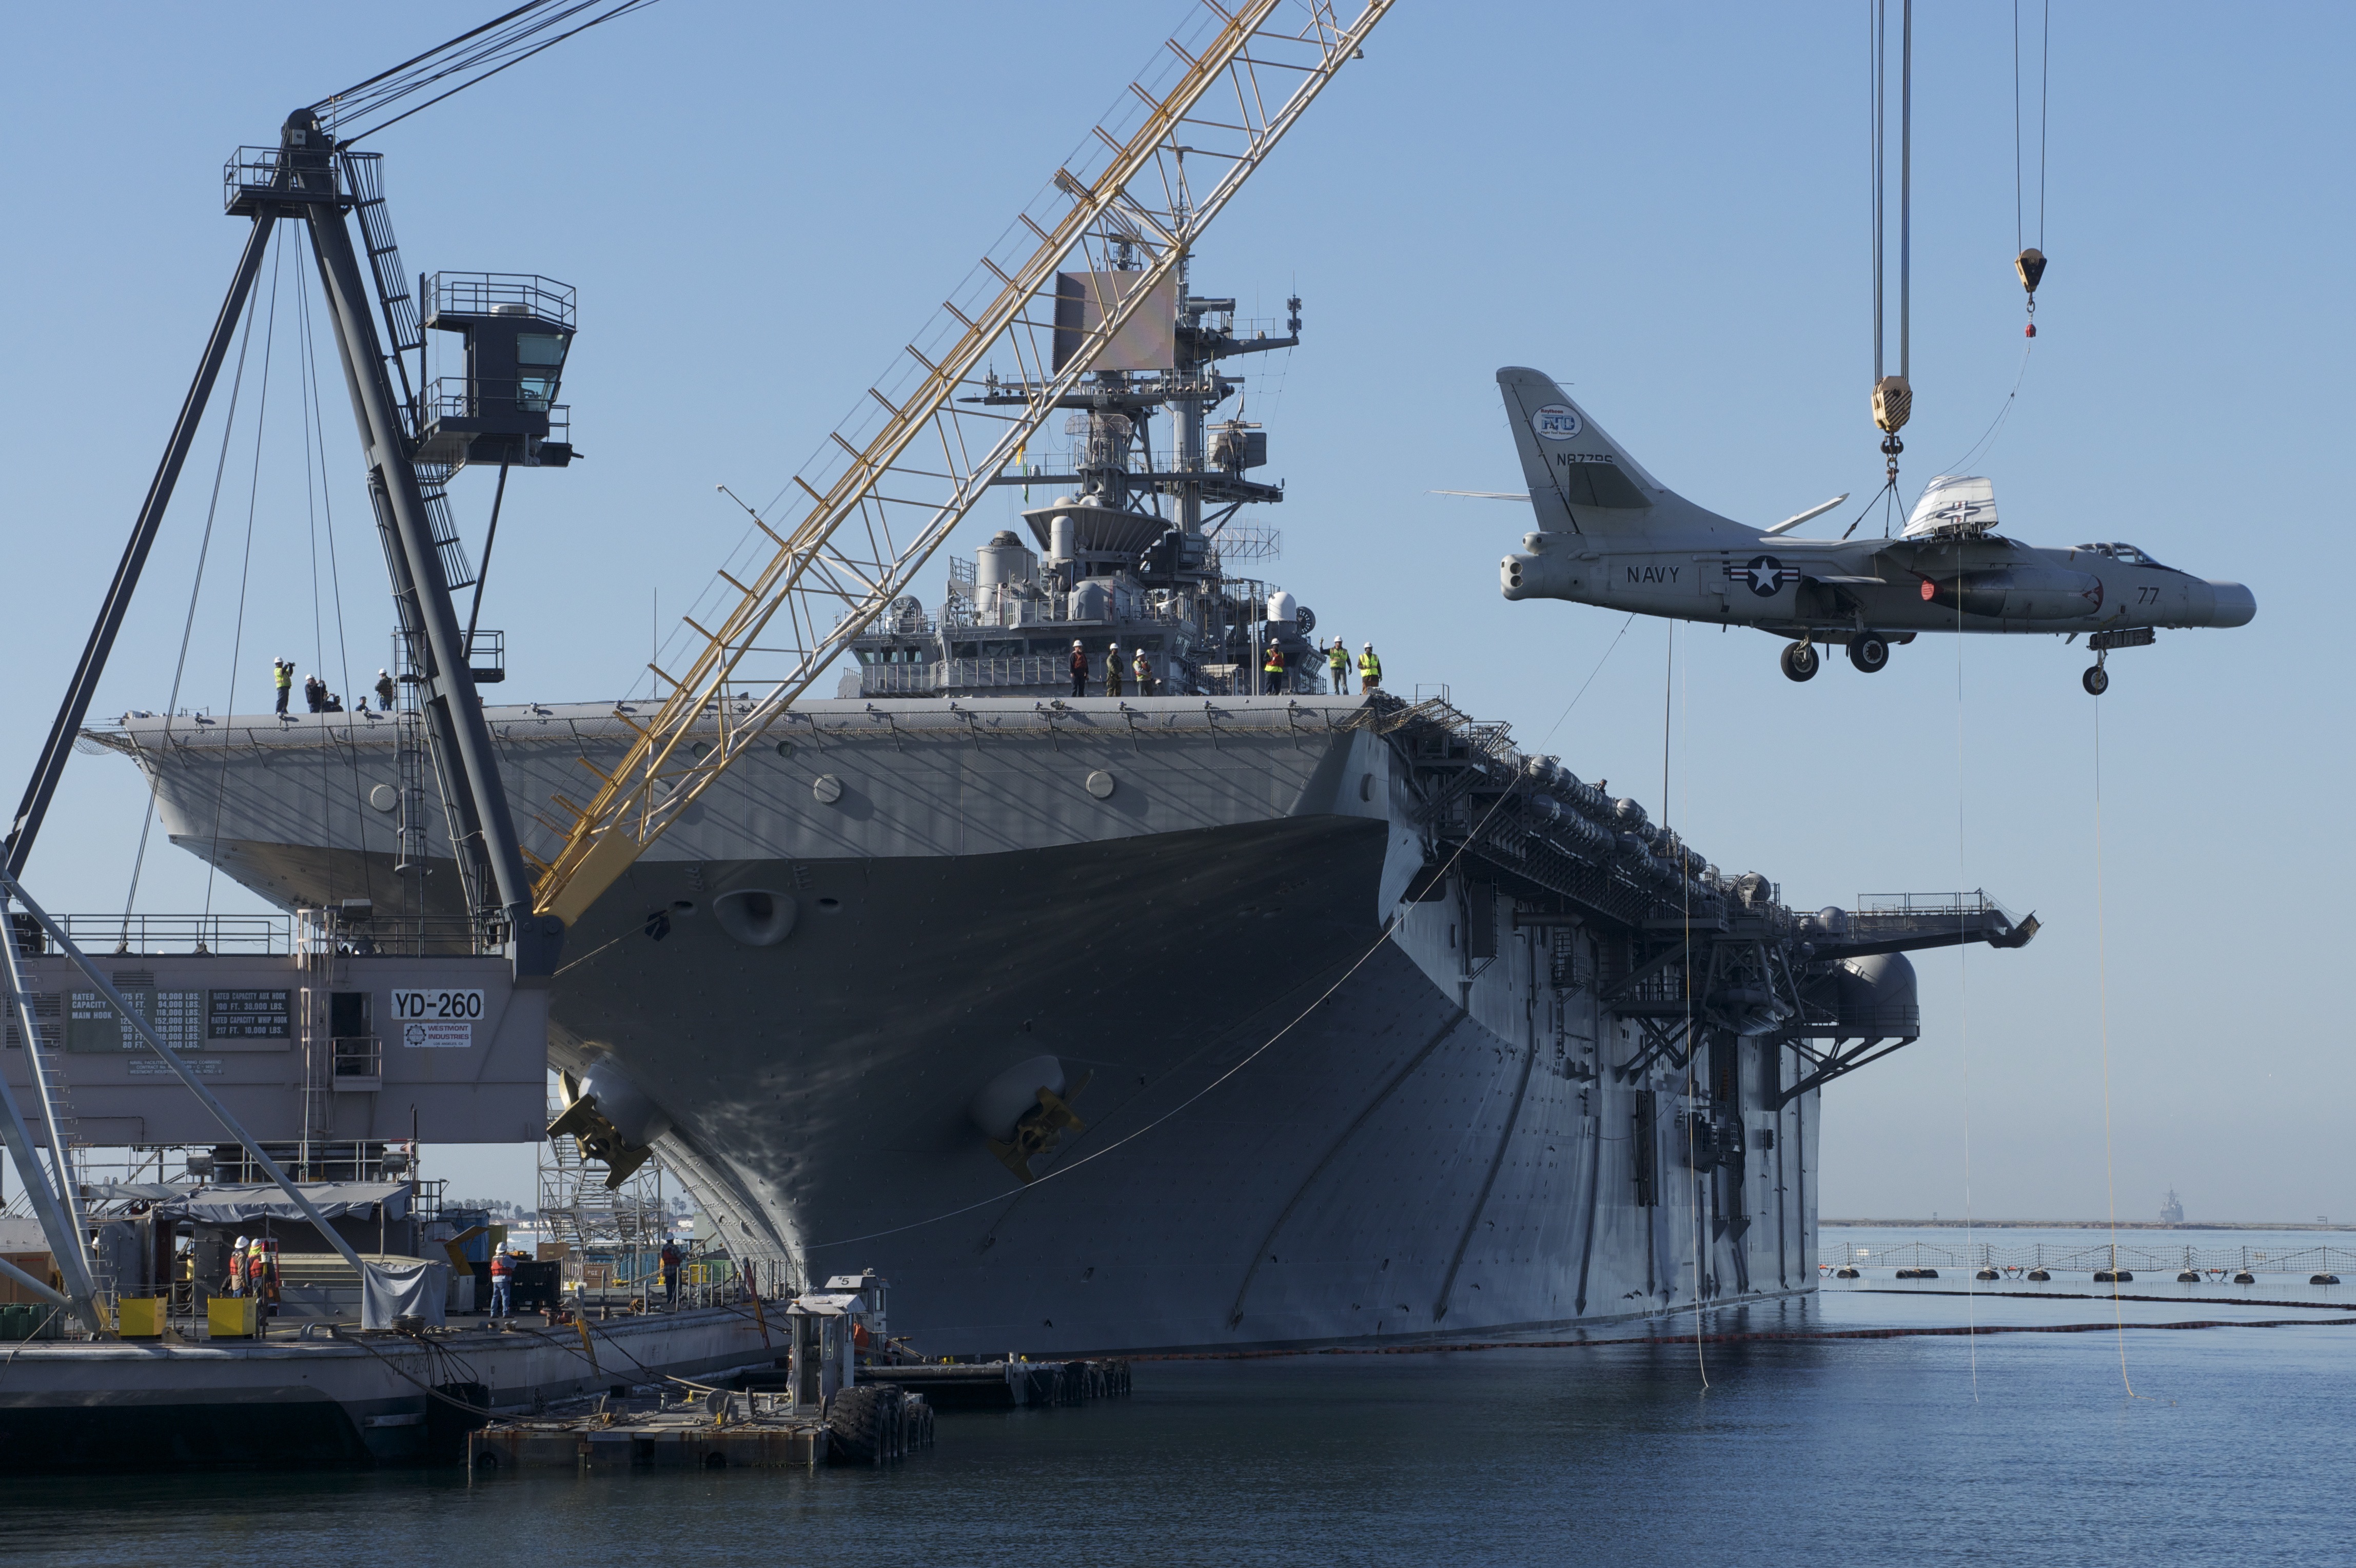 US_Navy_120208-N-ZC343-628_A_barge_crane_lifts_a_Navy_A3_to_the_flight_deck_of_the_amphibious_...jpg